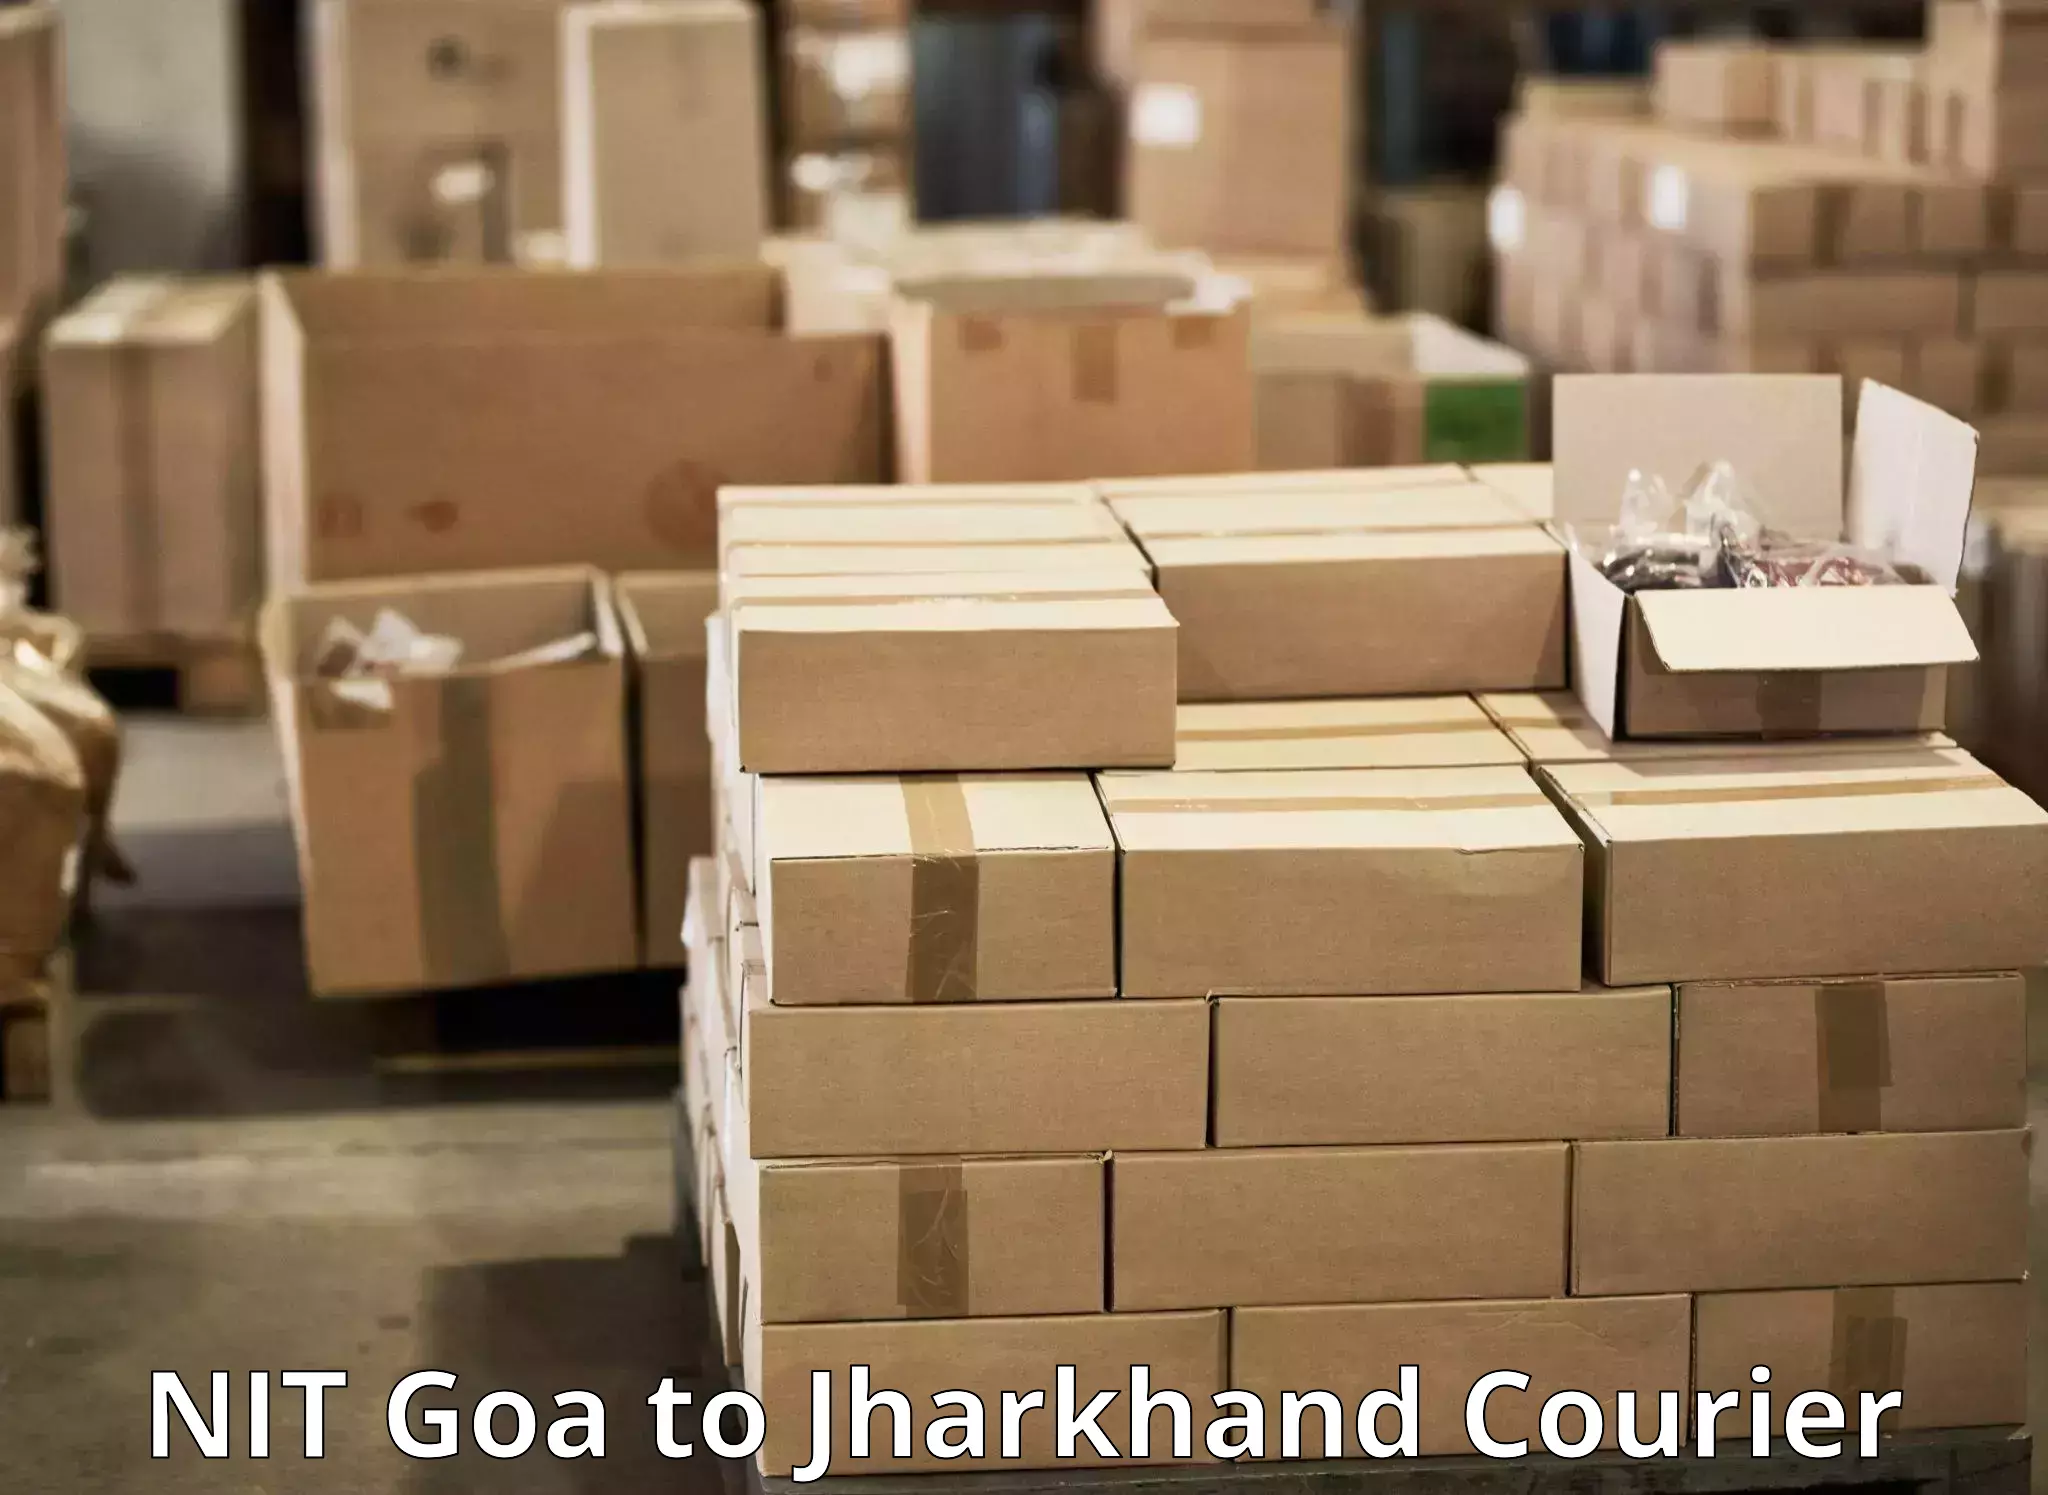 Budget-friendly shipping in NIT Goa to Padma Hazaribagh